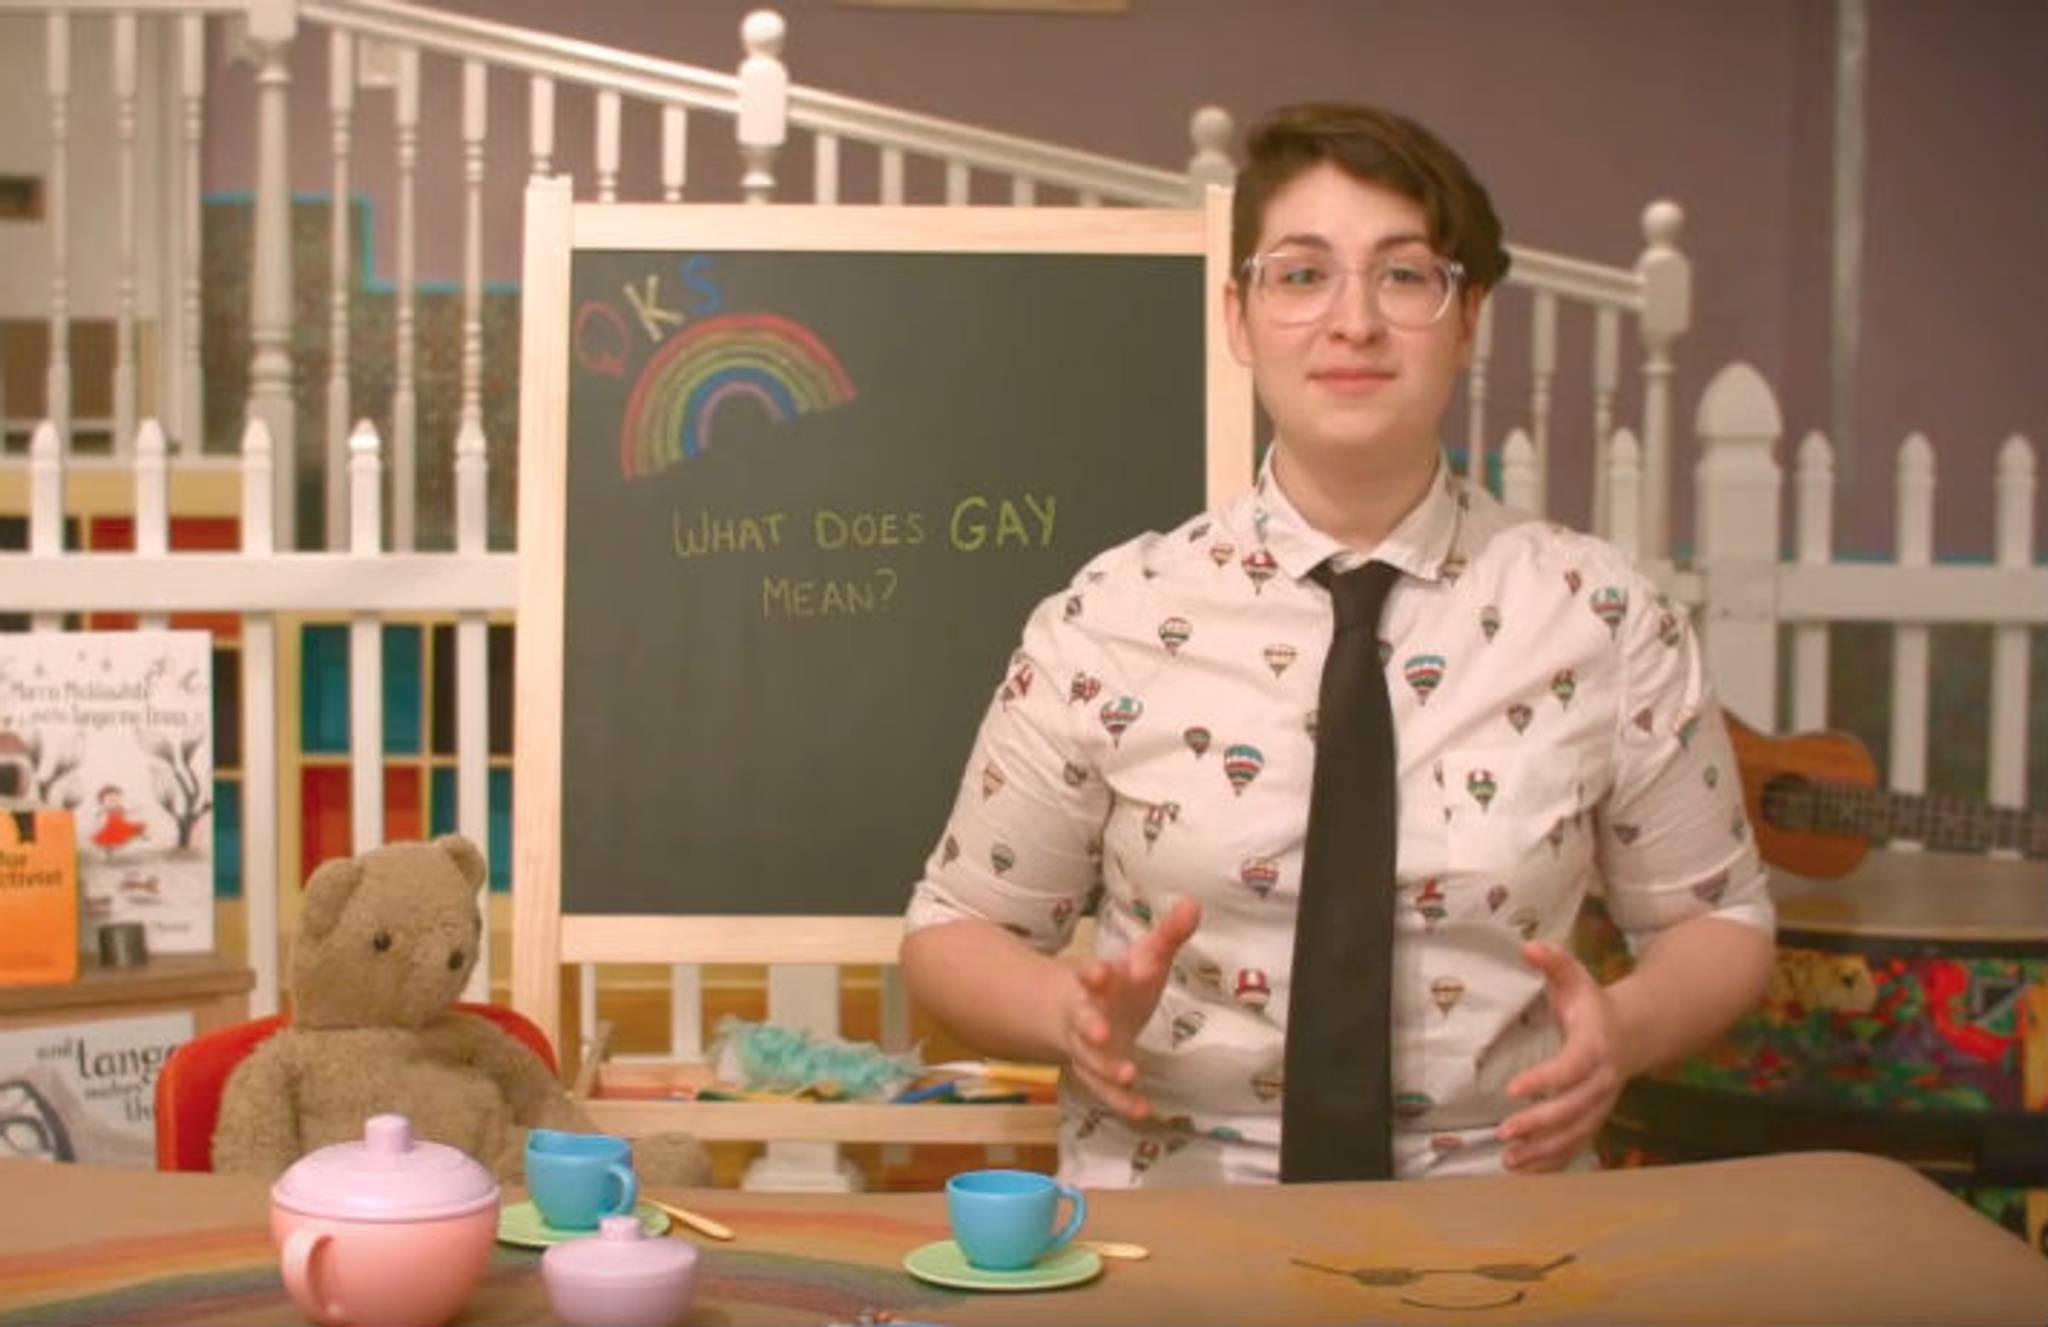 Queer Kid Stuff teaches Gen Z about LGBTQ issues